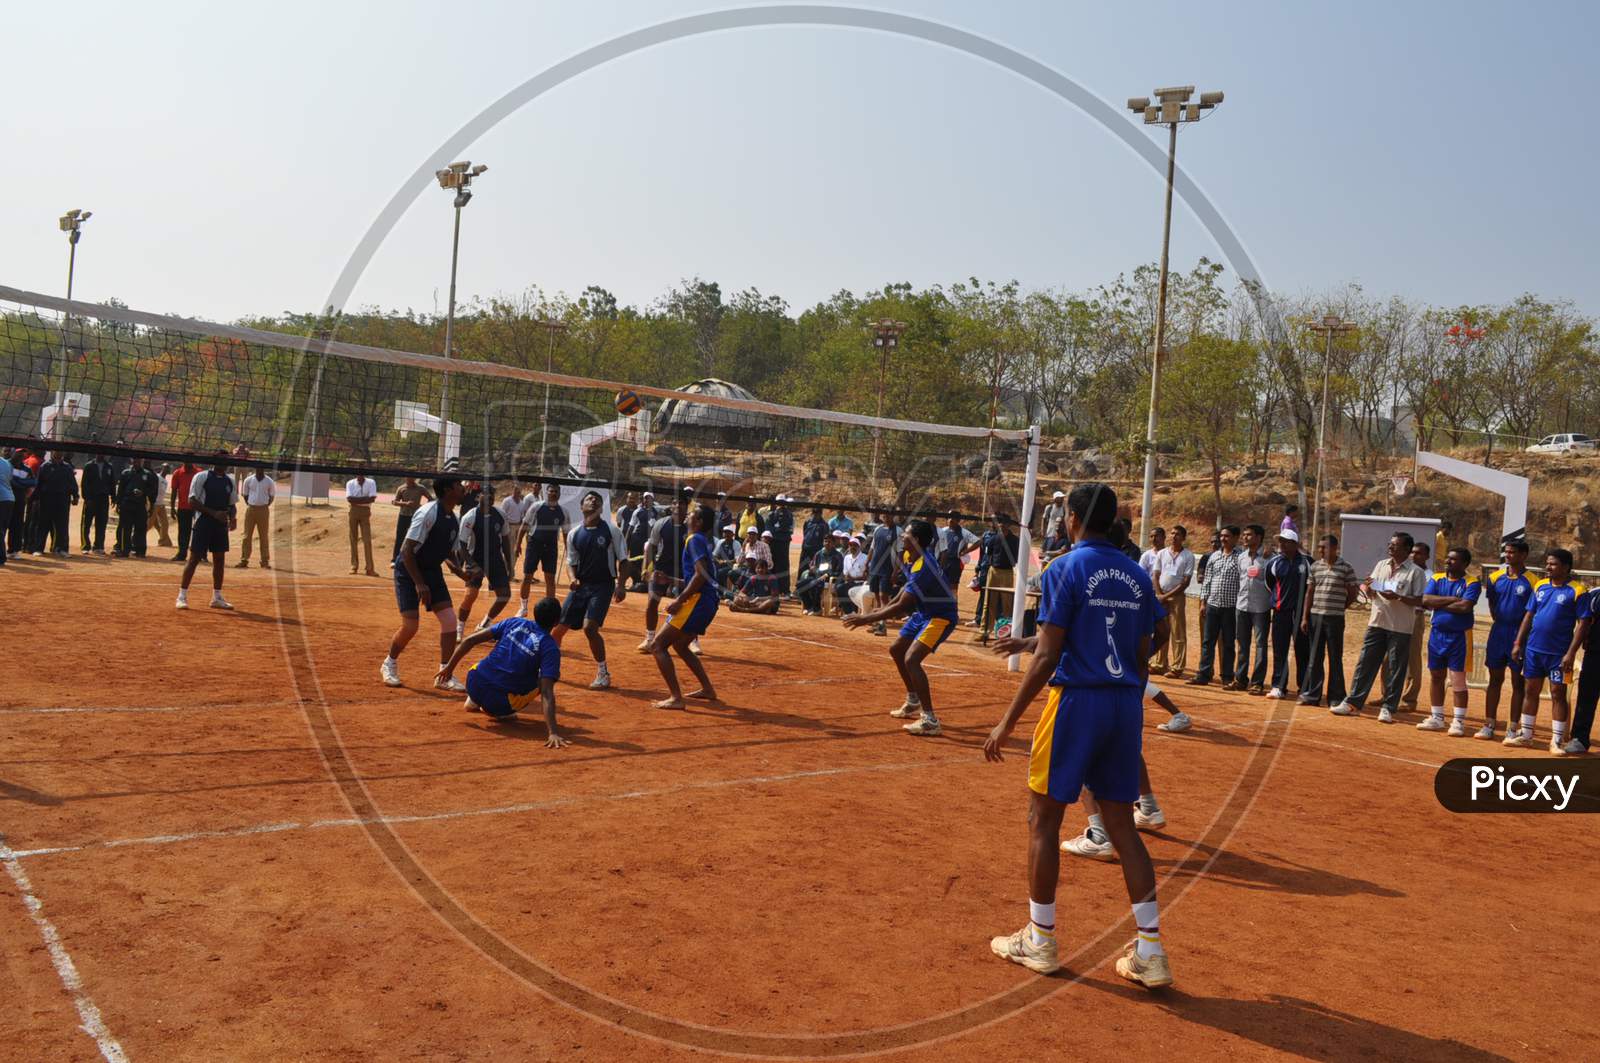 Two School teams playing volleyball match